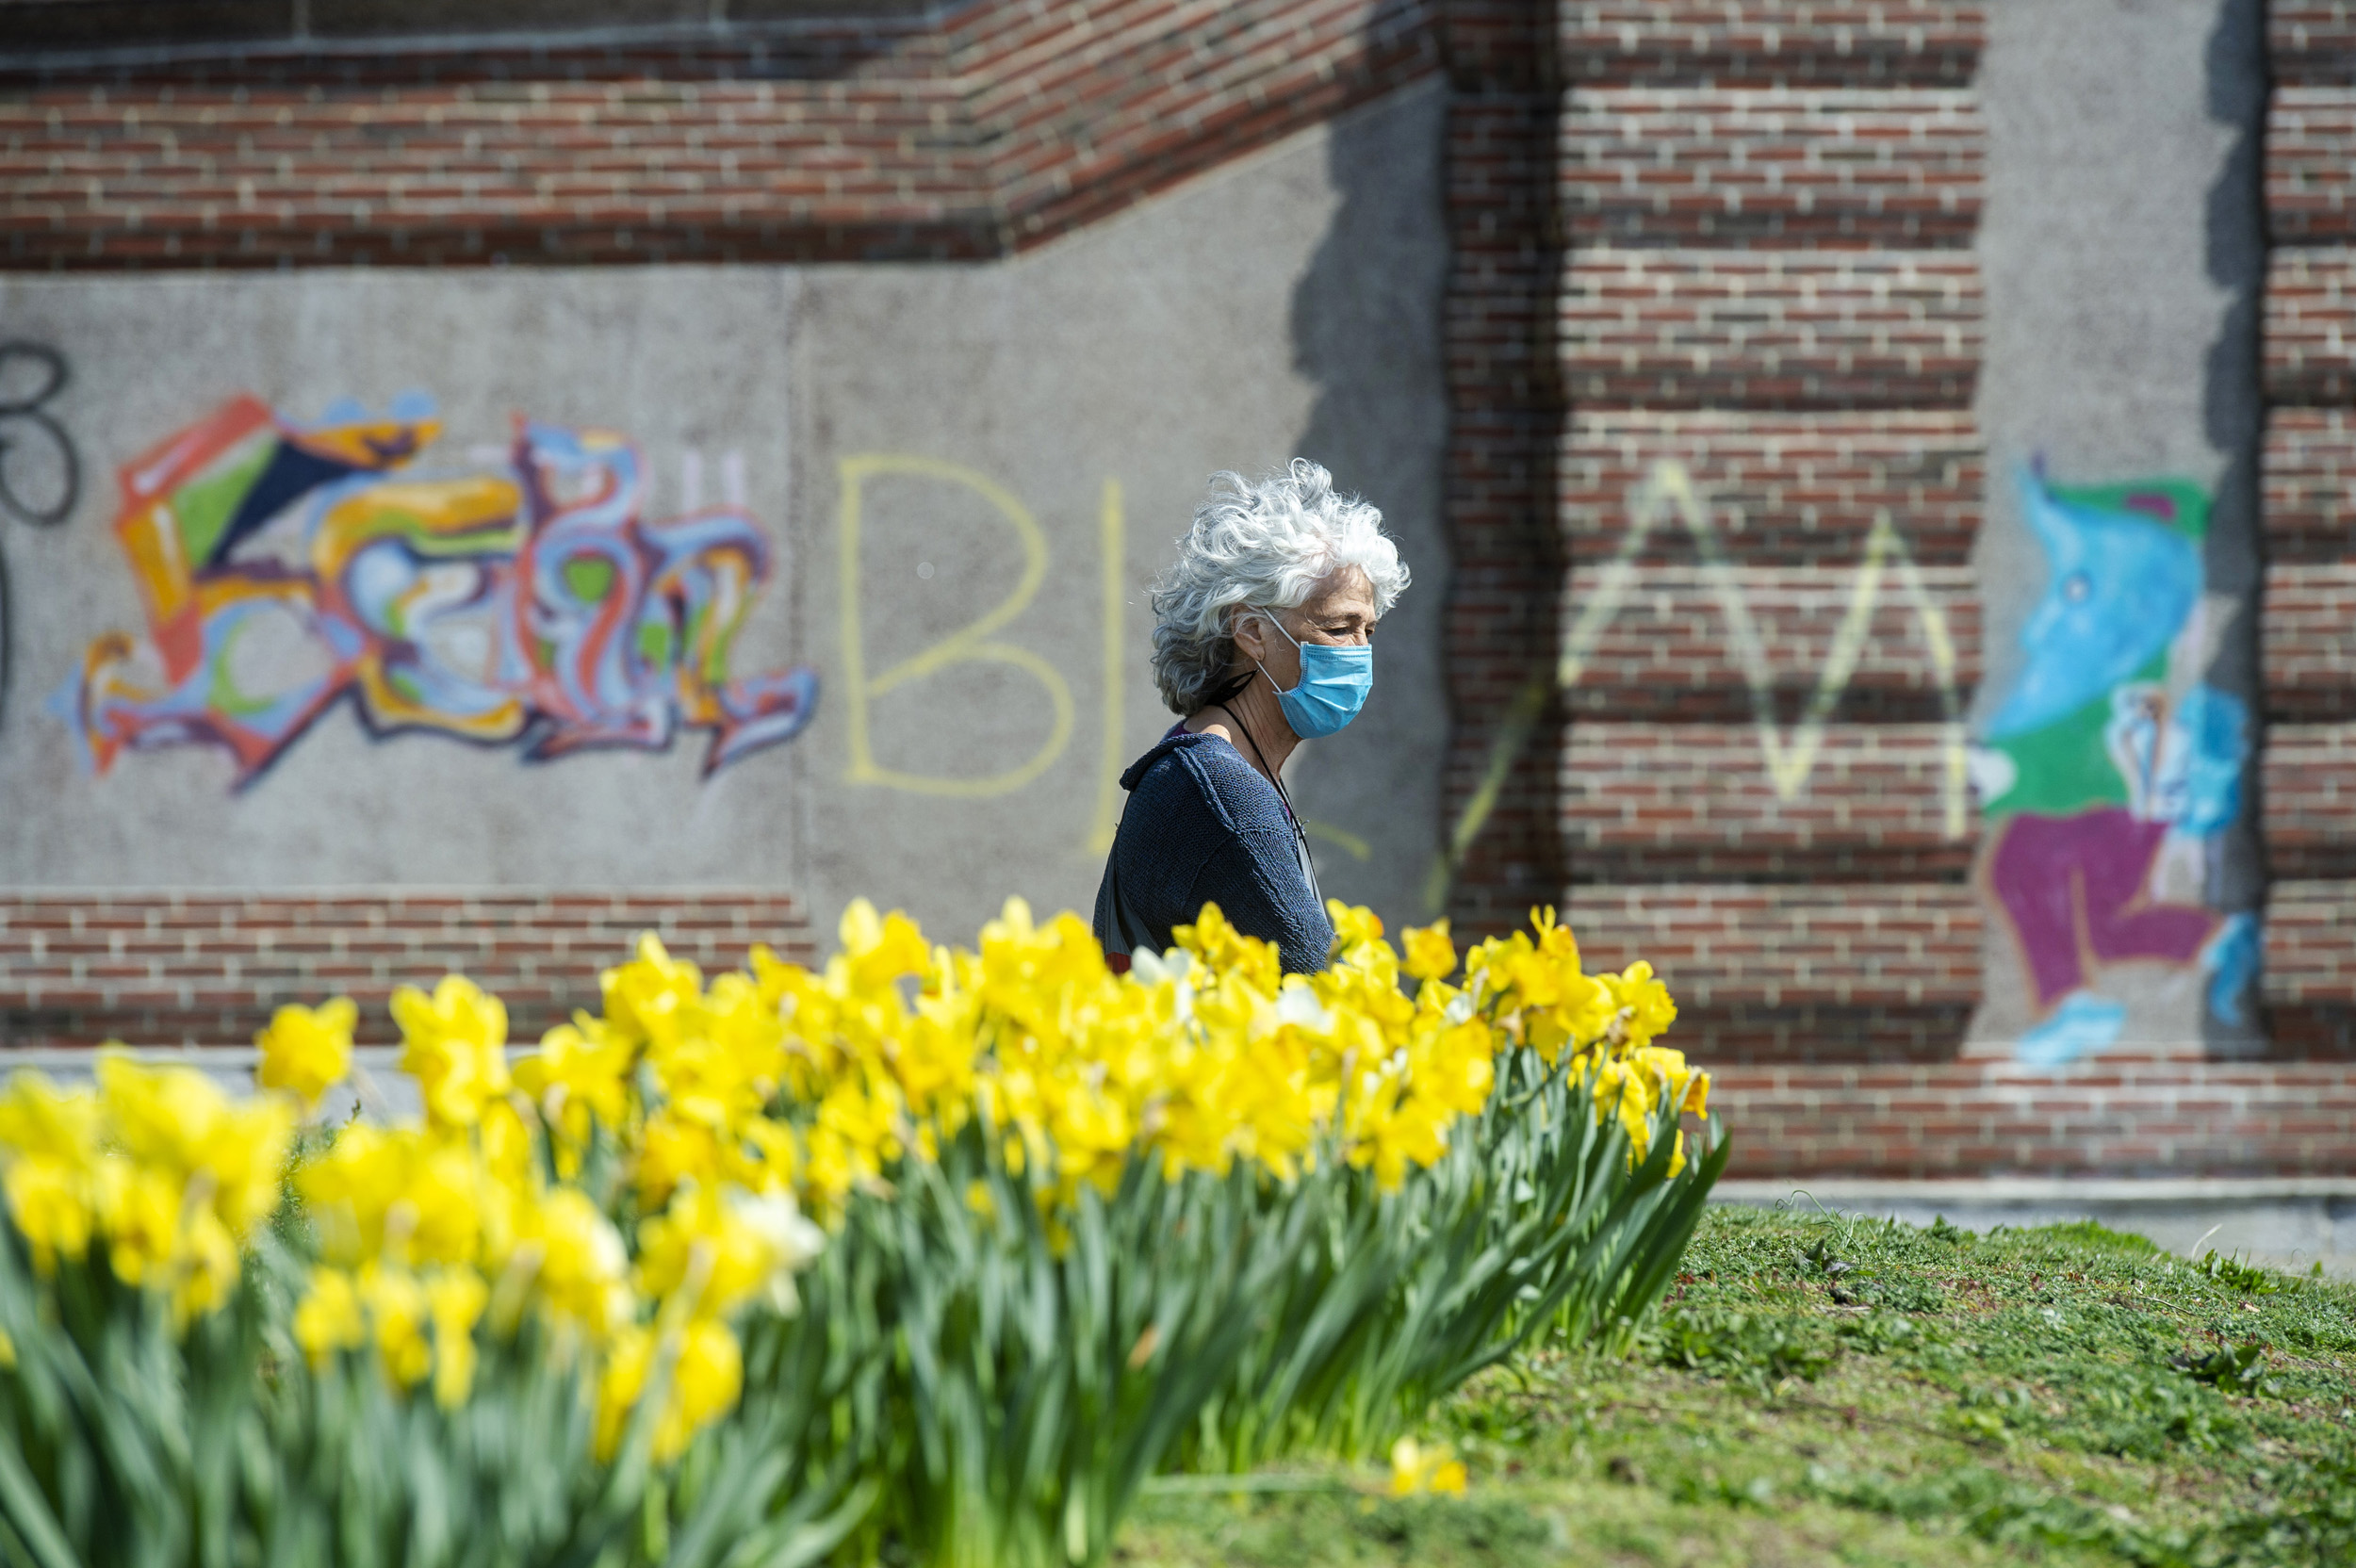 Cambridge resident Amy Rugel soaks up some sun by a row of daffodils at the Anderson Memorial Bridge.